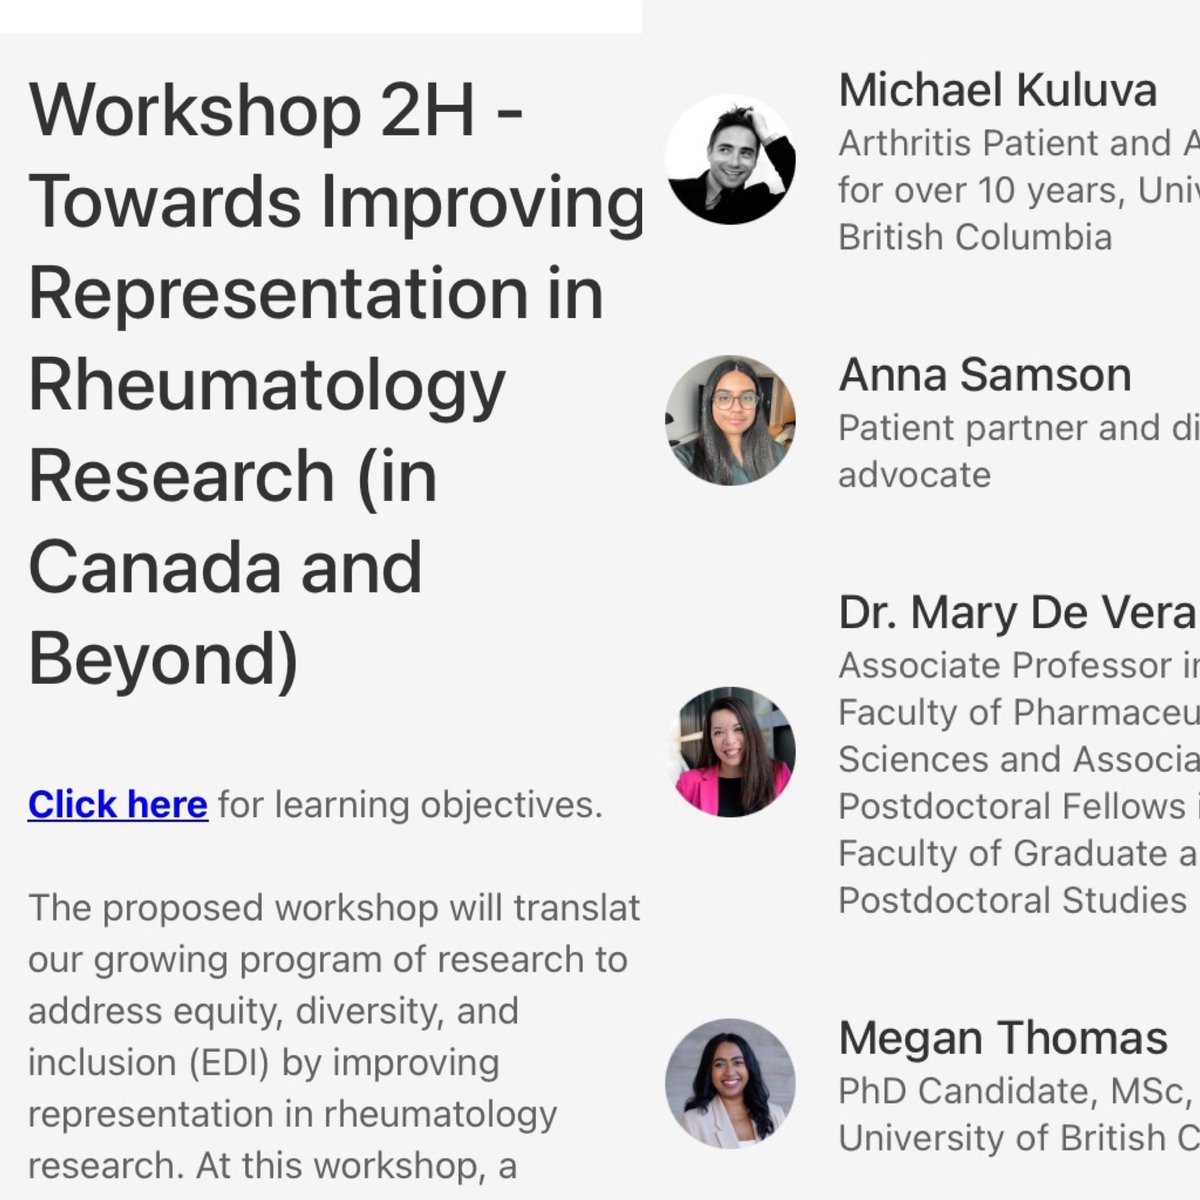 @CRASCRRheum #ASM24 Excited that this workshop proposal was accepted and looking forward to presenting it today with our amazing team - @meganthomas829 @annasamson_ @MichaelKuluva! @Arthritis_ARC